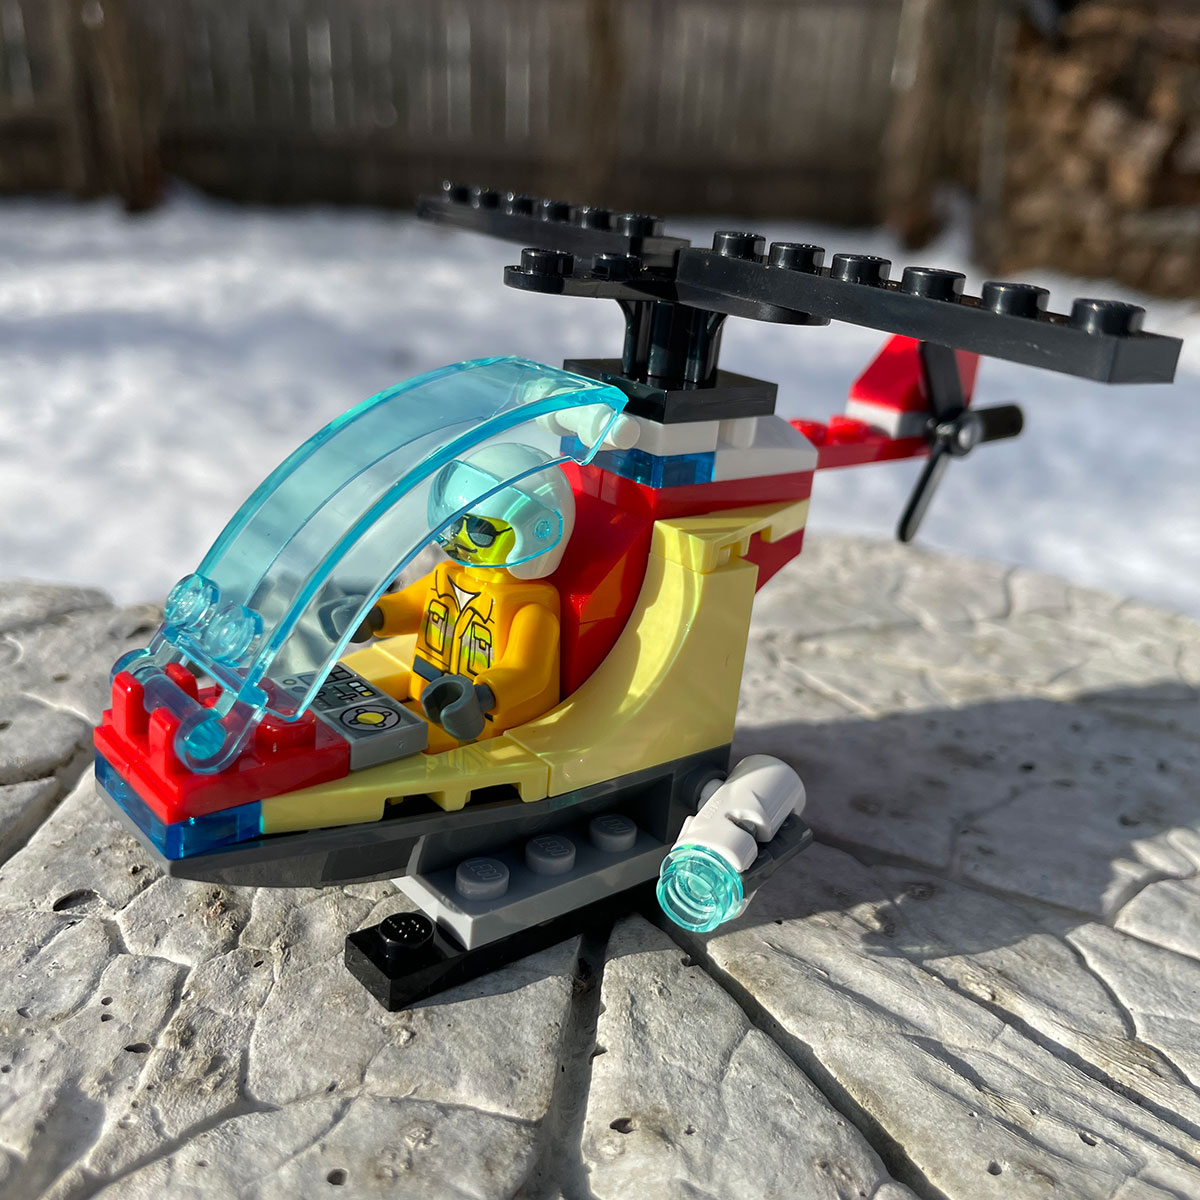 A LEGO helicopter with pilot ready to fight wild fires.